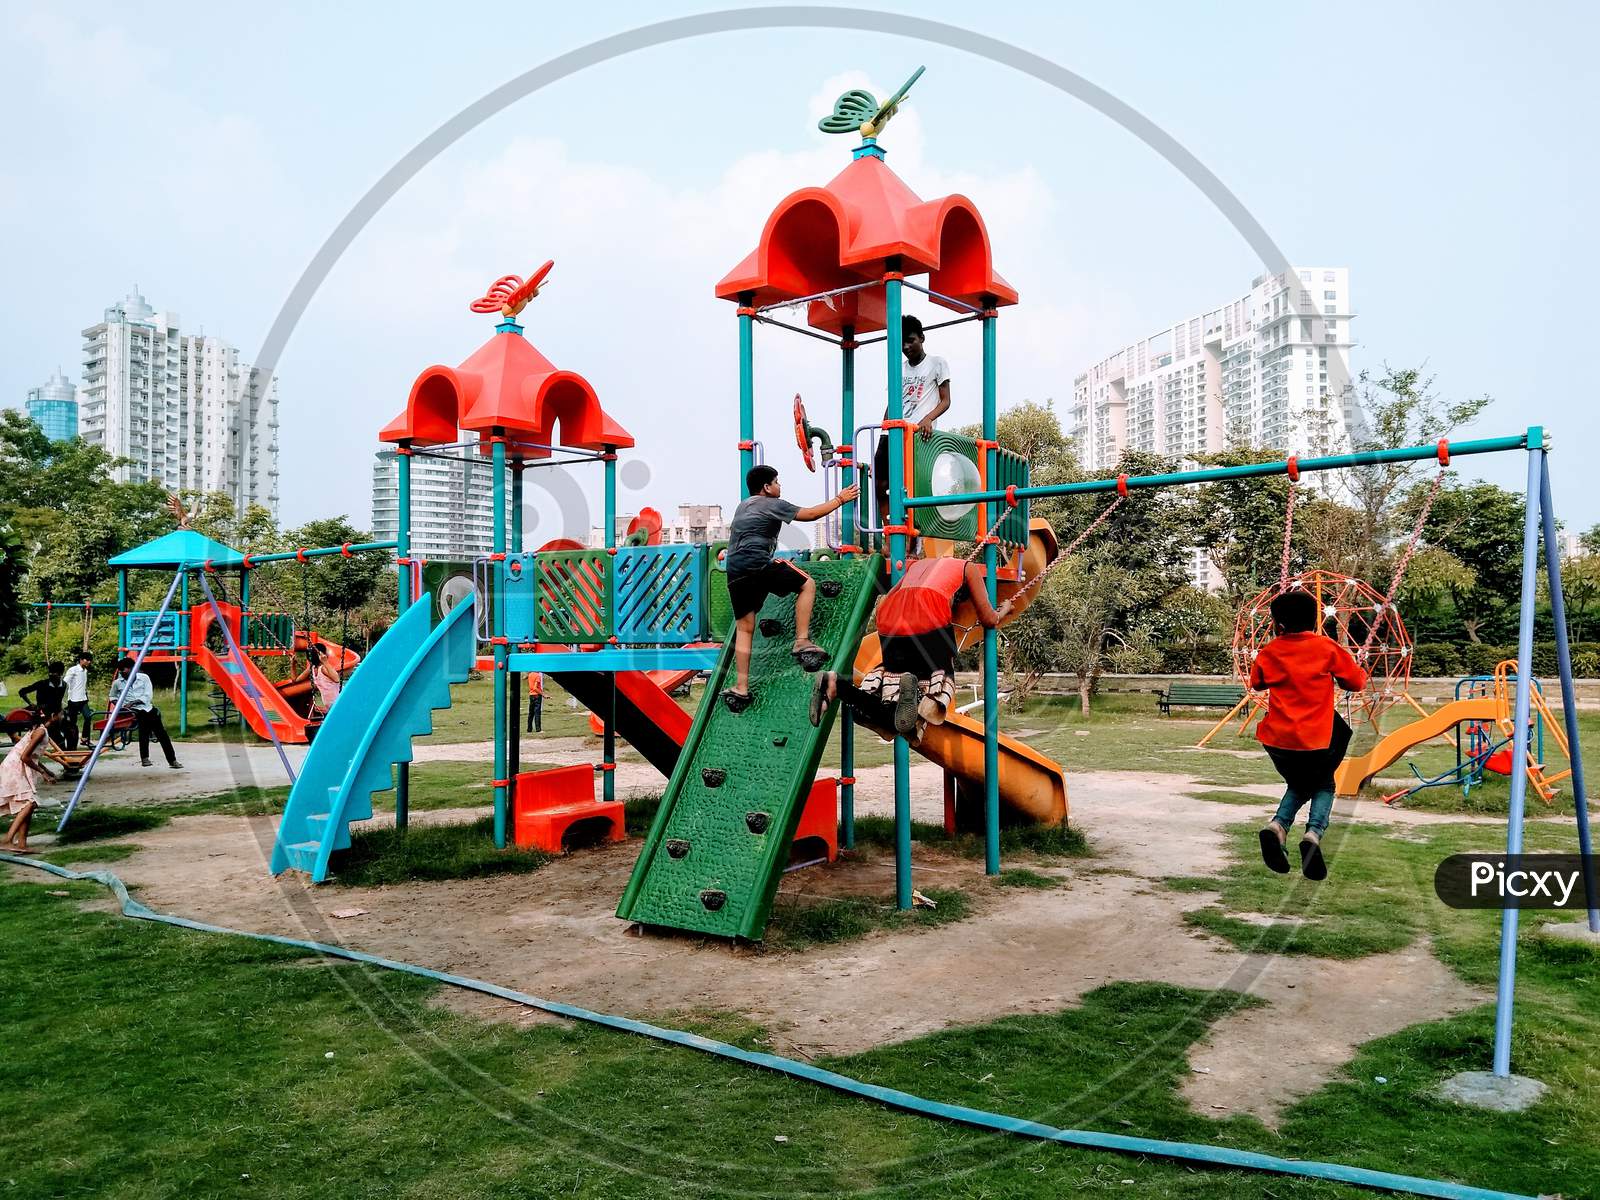 Children Playing At a Park